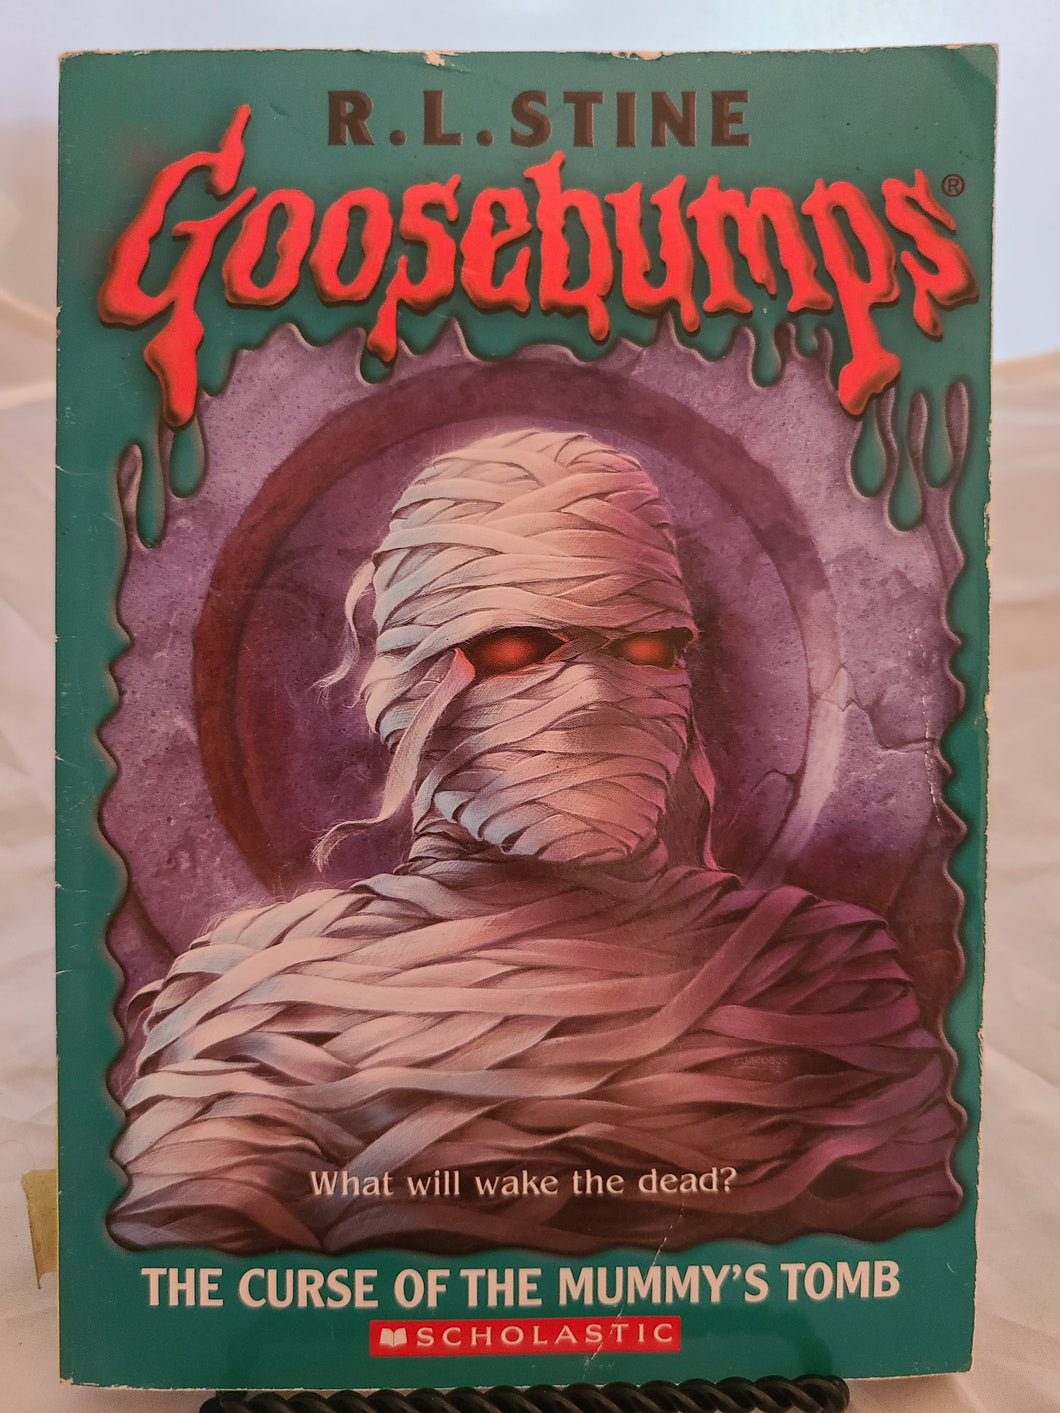 Goosebumps - The Curse of the Mummy's Tomb